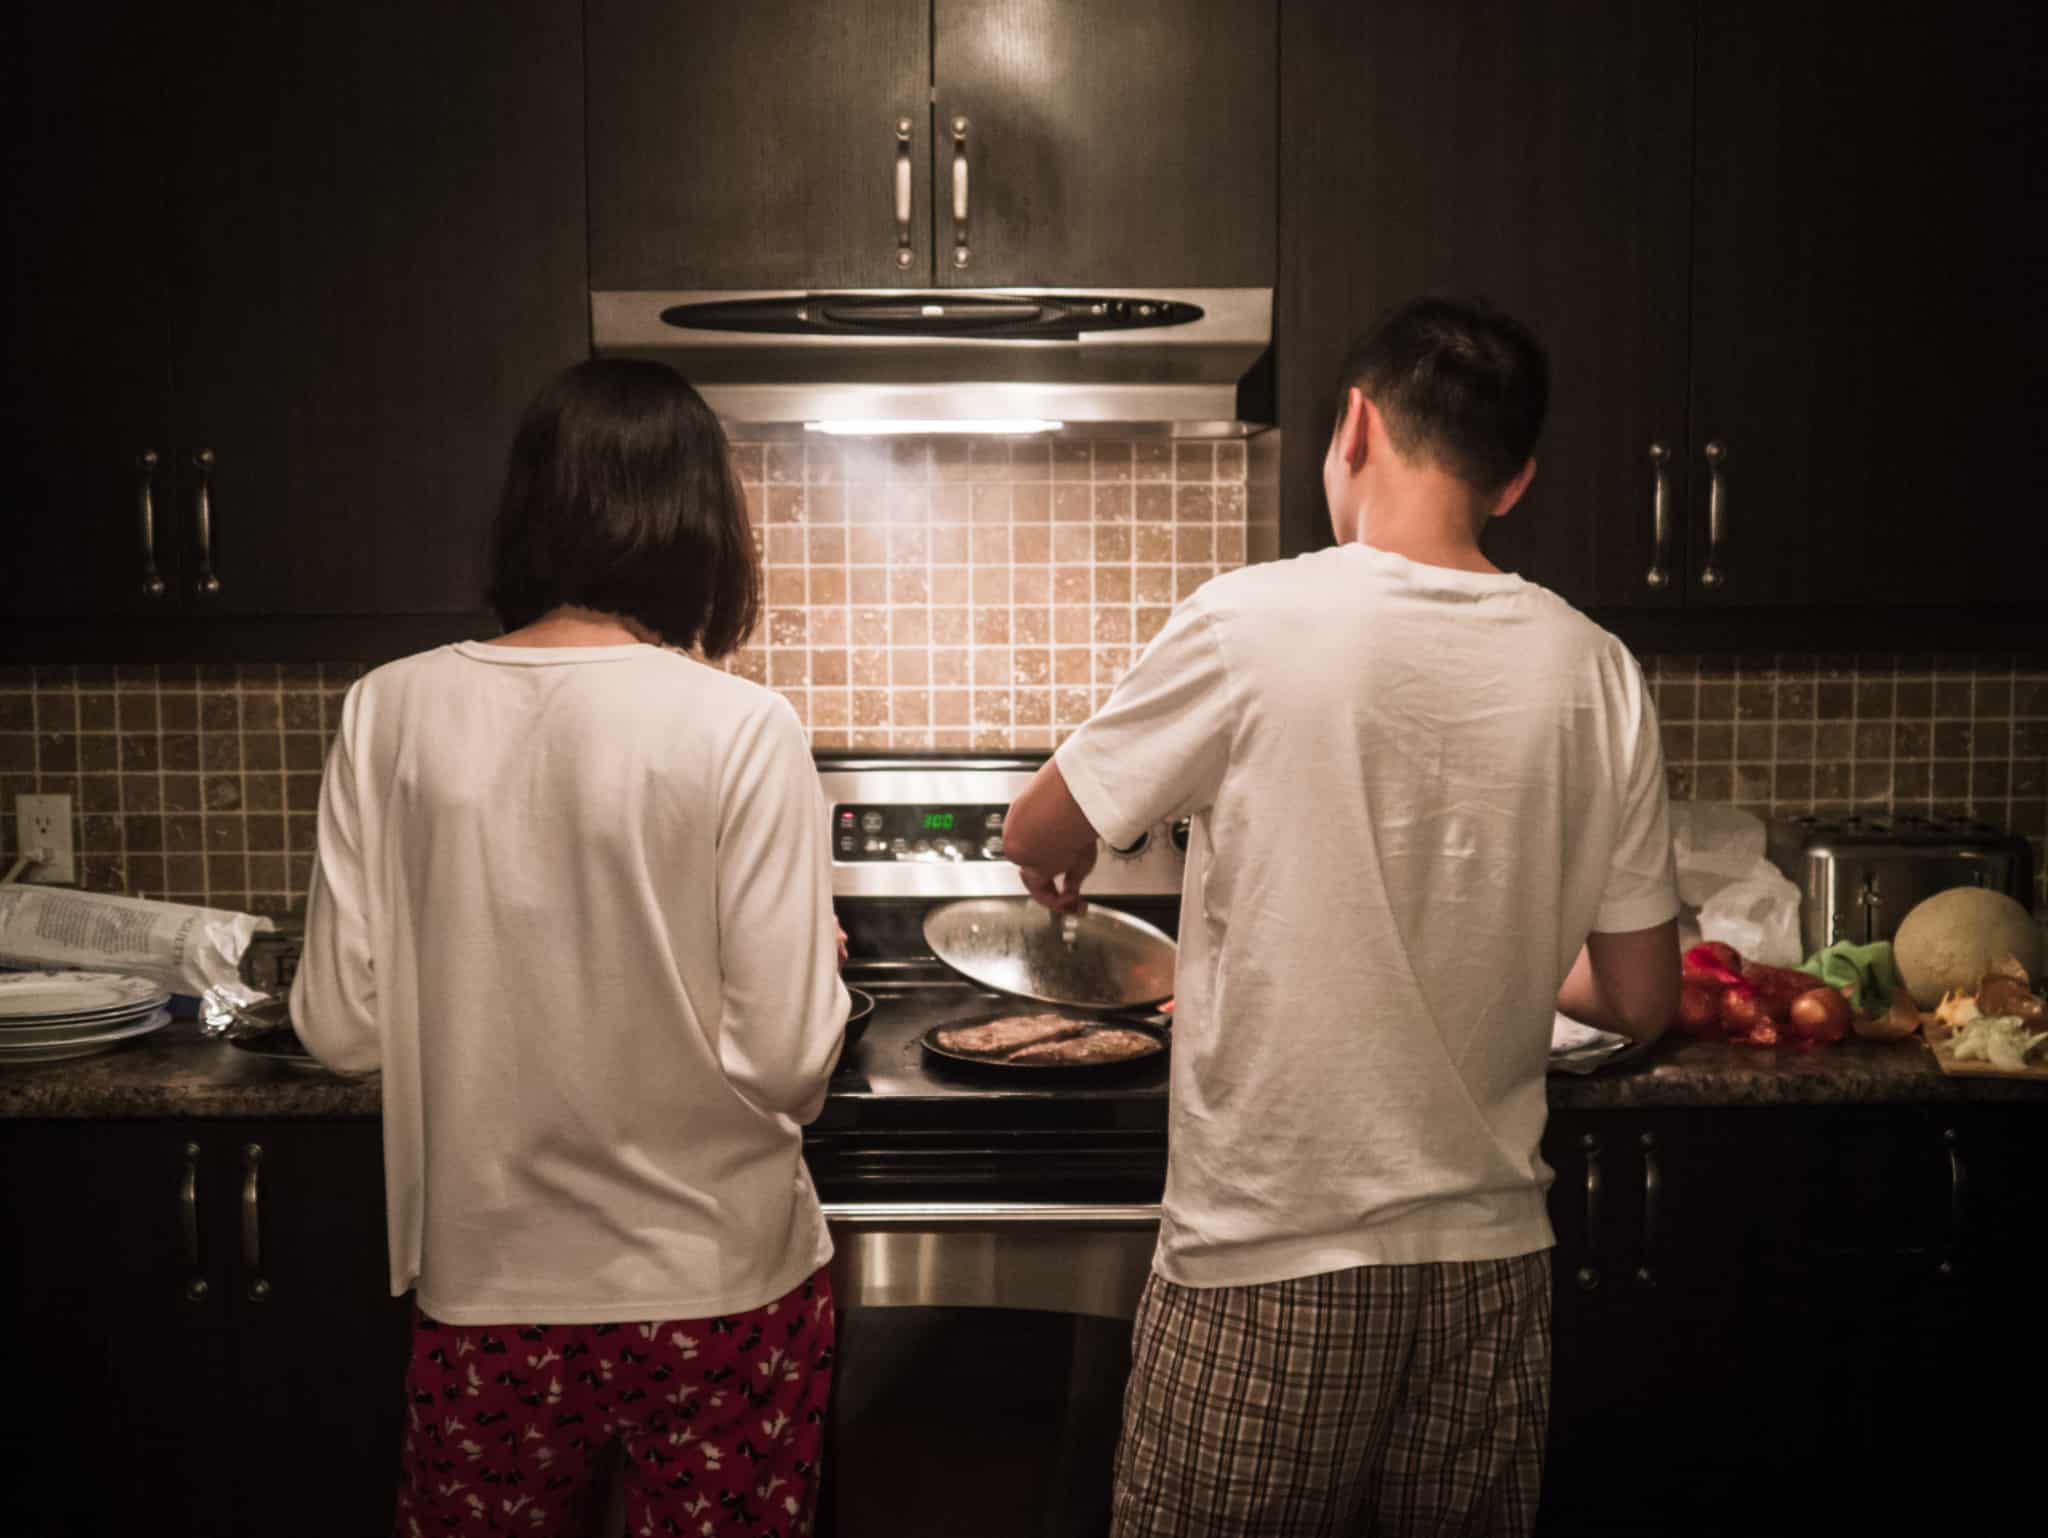 young couple cooking, enjoying equipment with light and gas that are now suffering increases